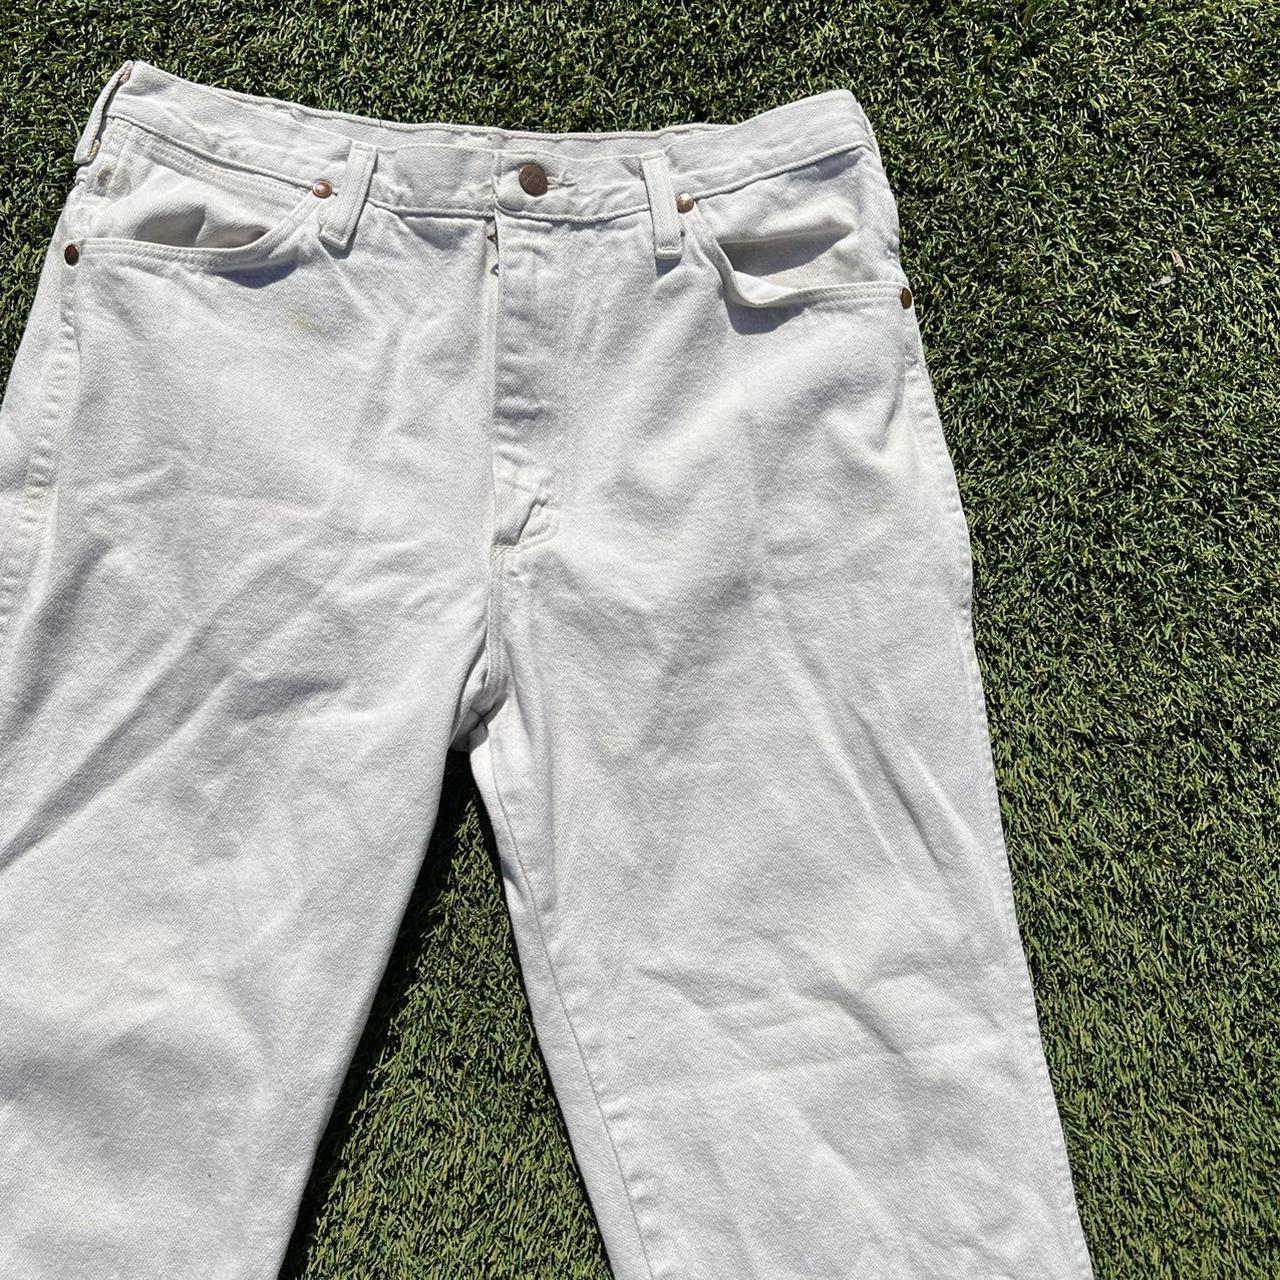 Product Image 1 - Vintage 80s White Wrangler Jeans
No